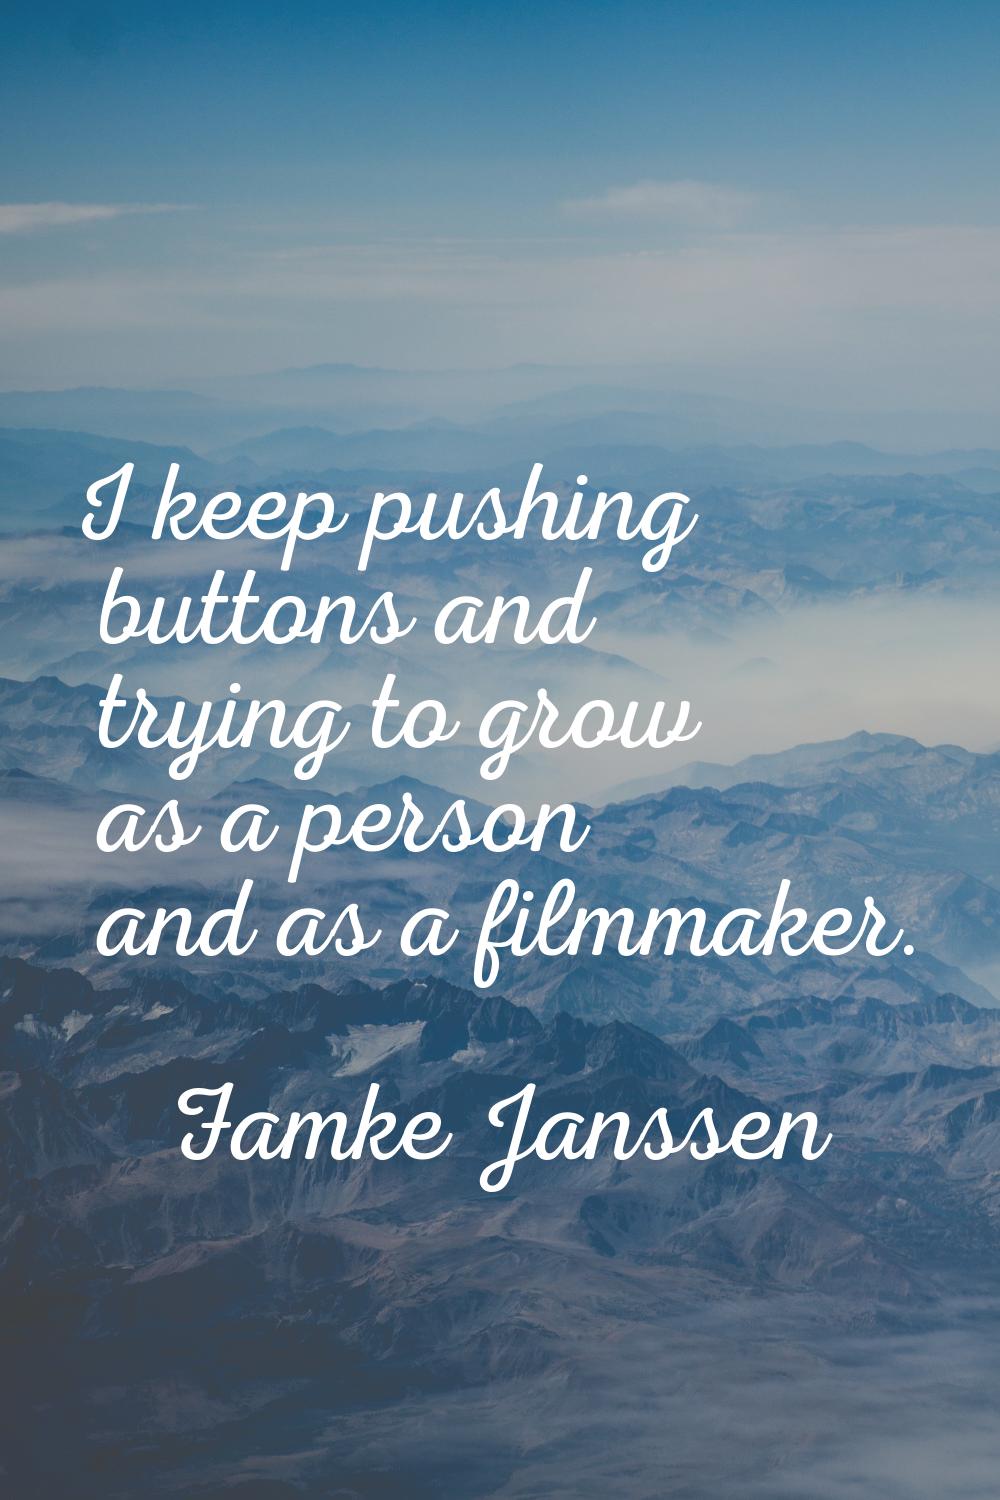 I keep pushing buttons and trying to grow as a person and as a filmmaker.